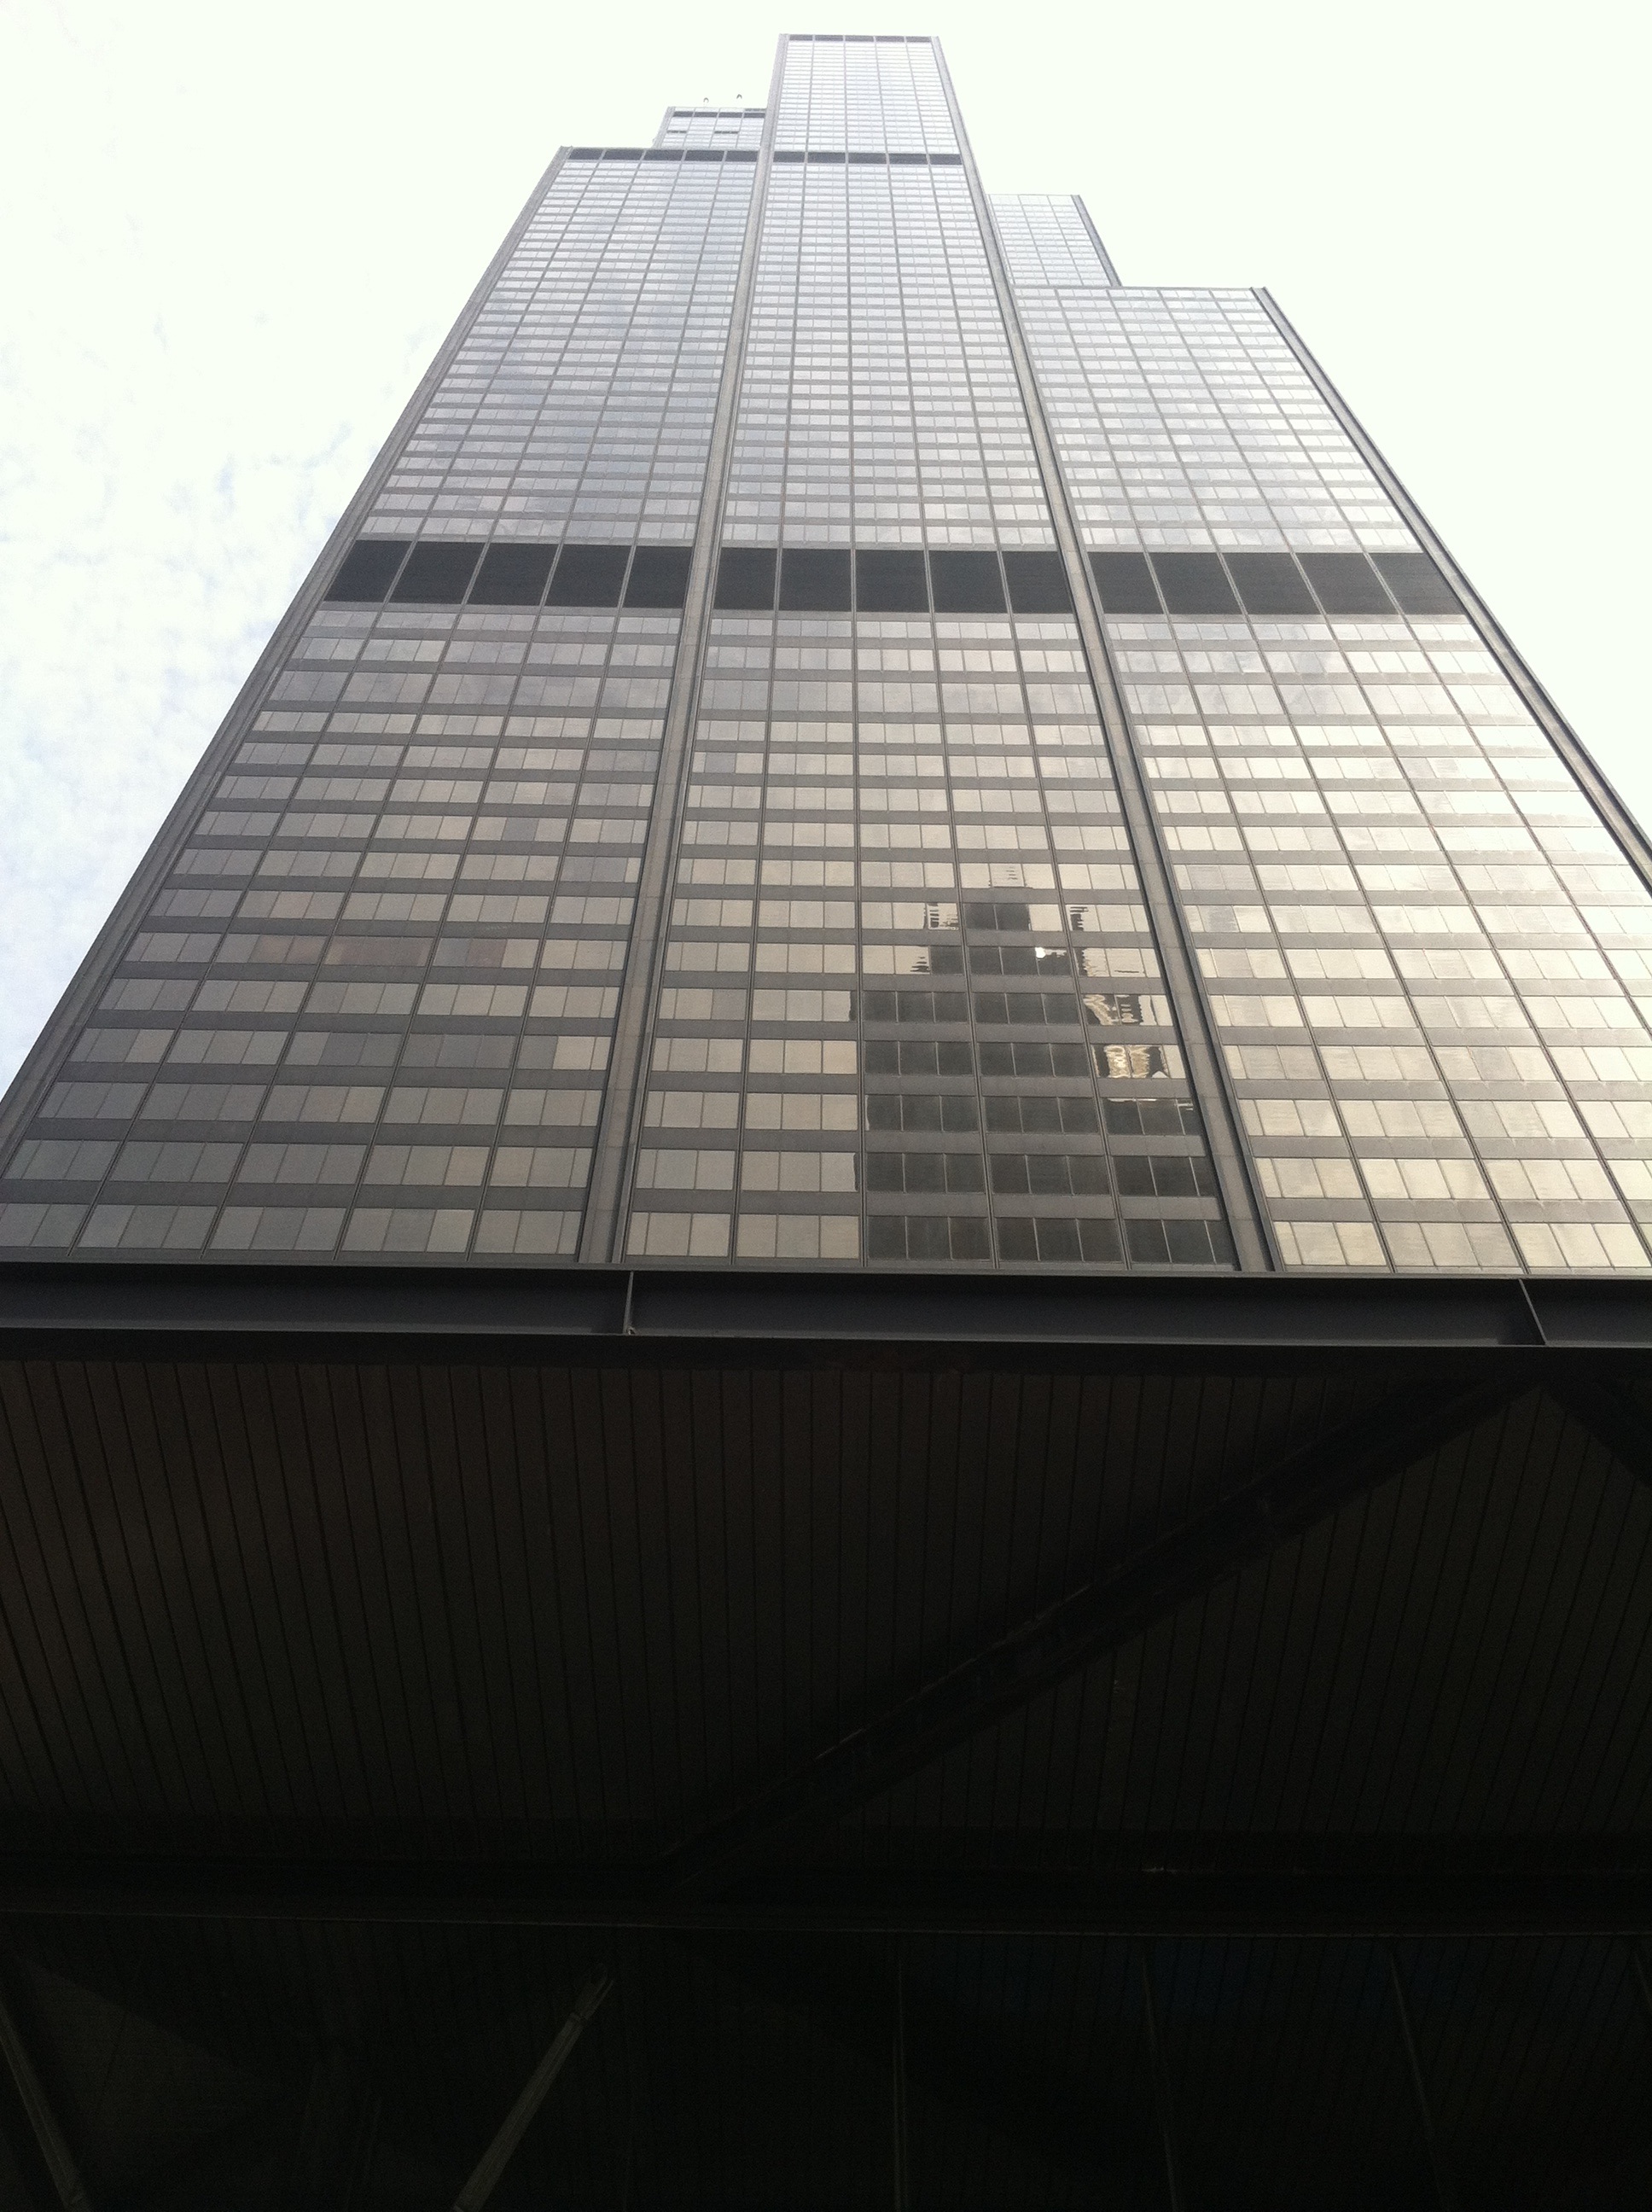 The Willis Tower in Chicago